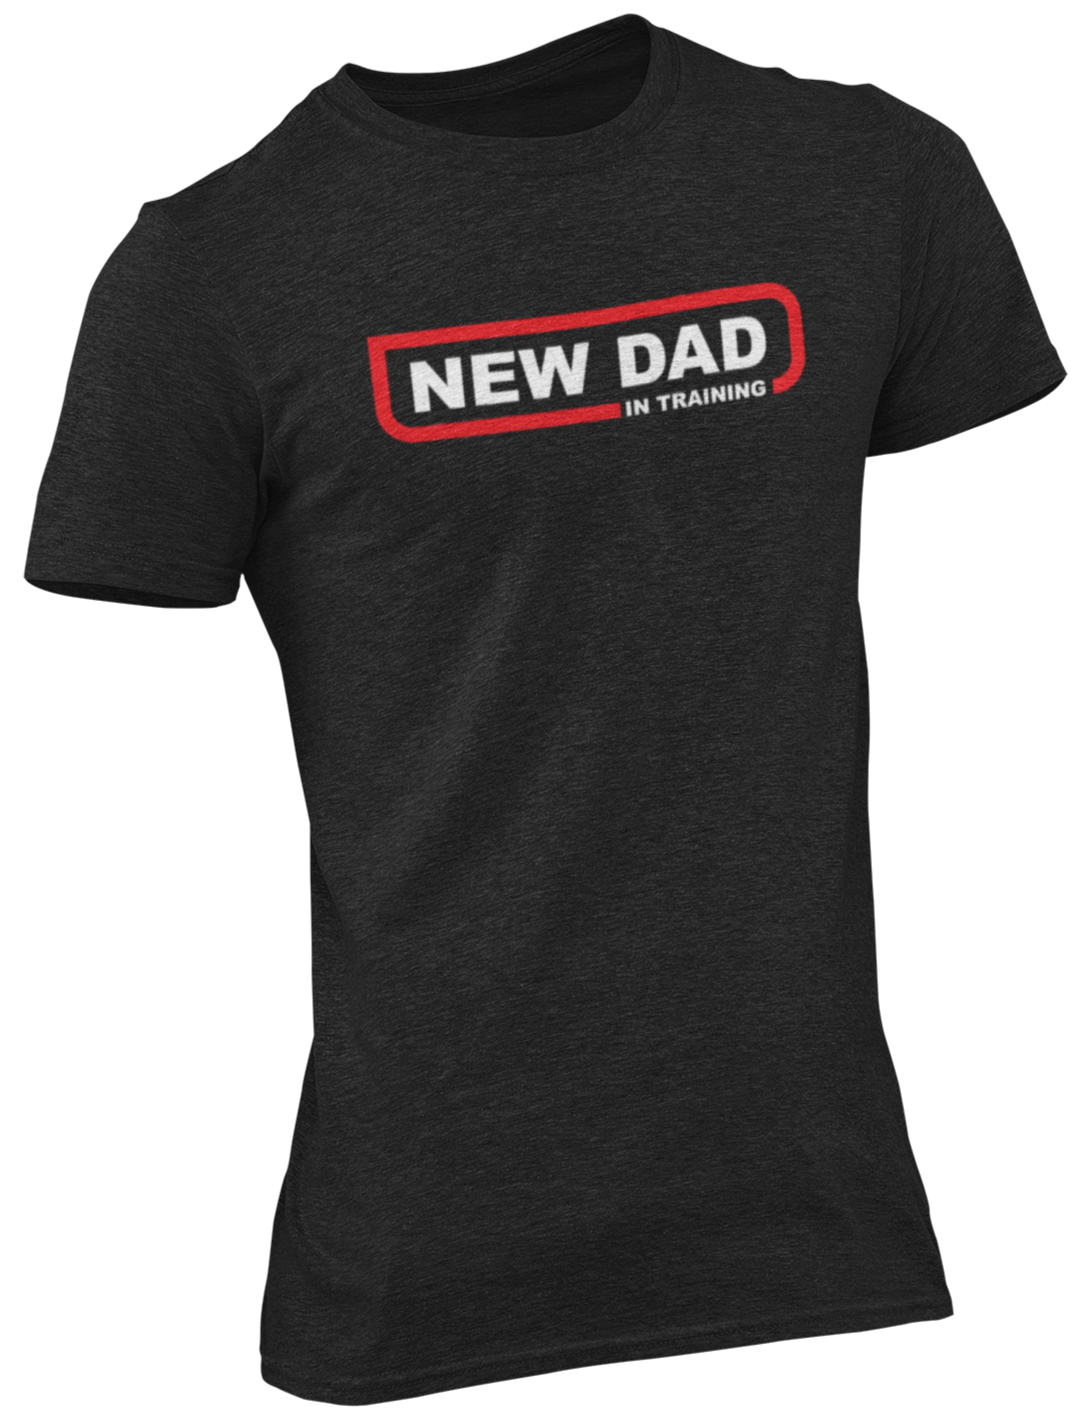 New Dad in Training Tee